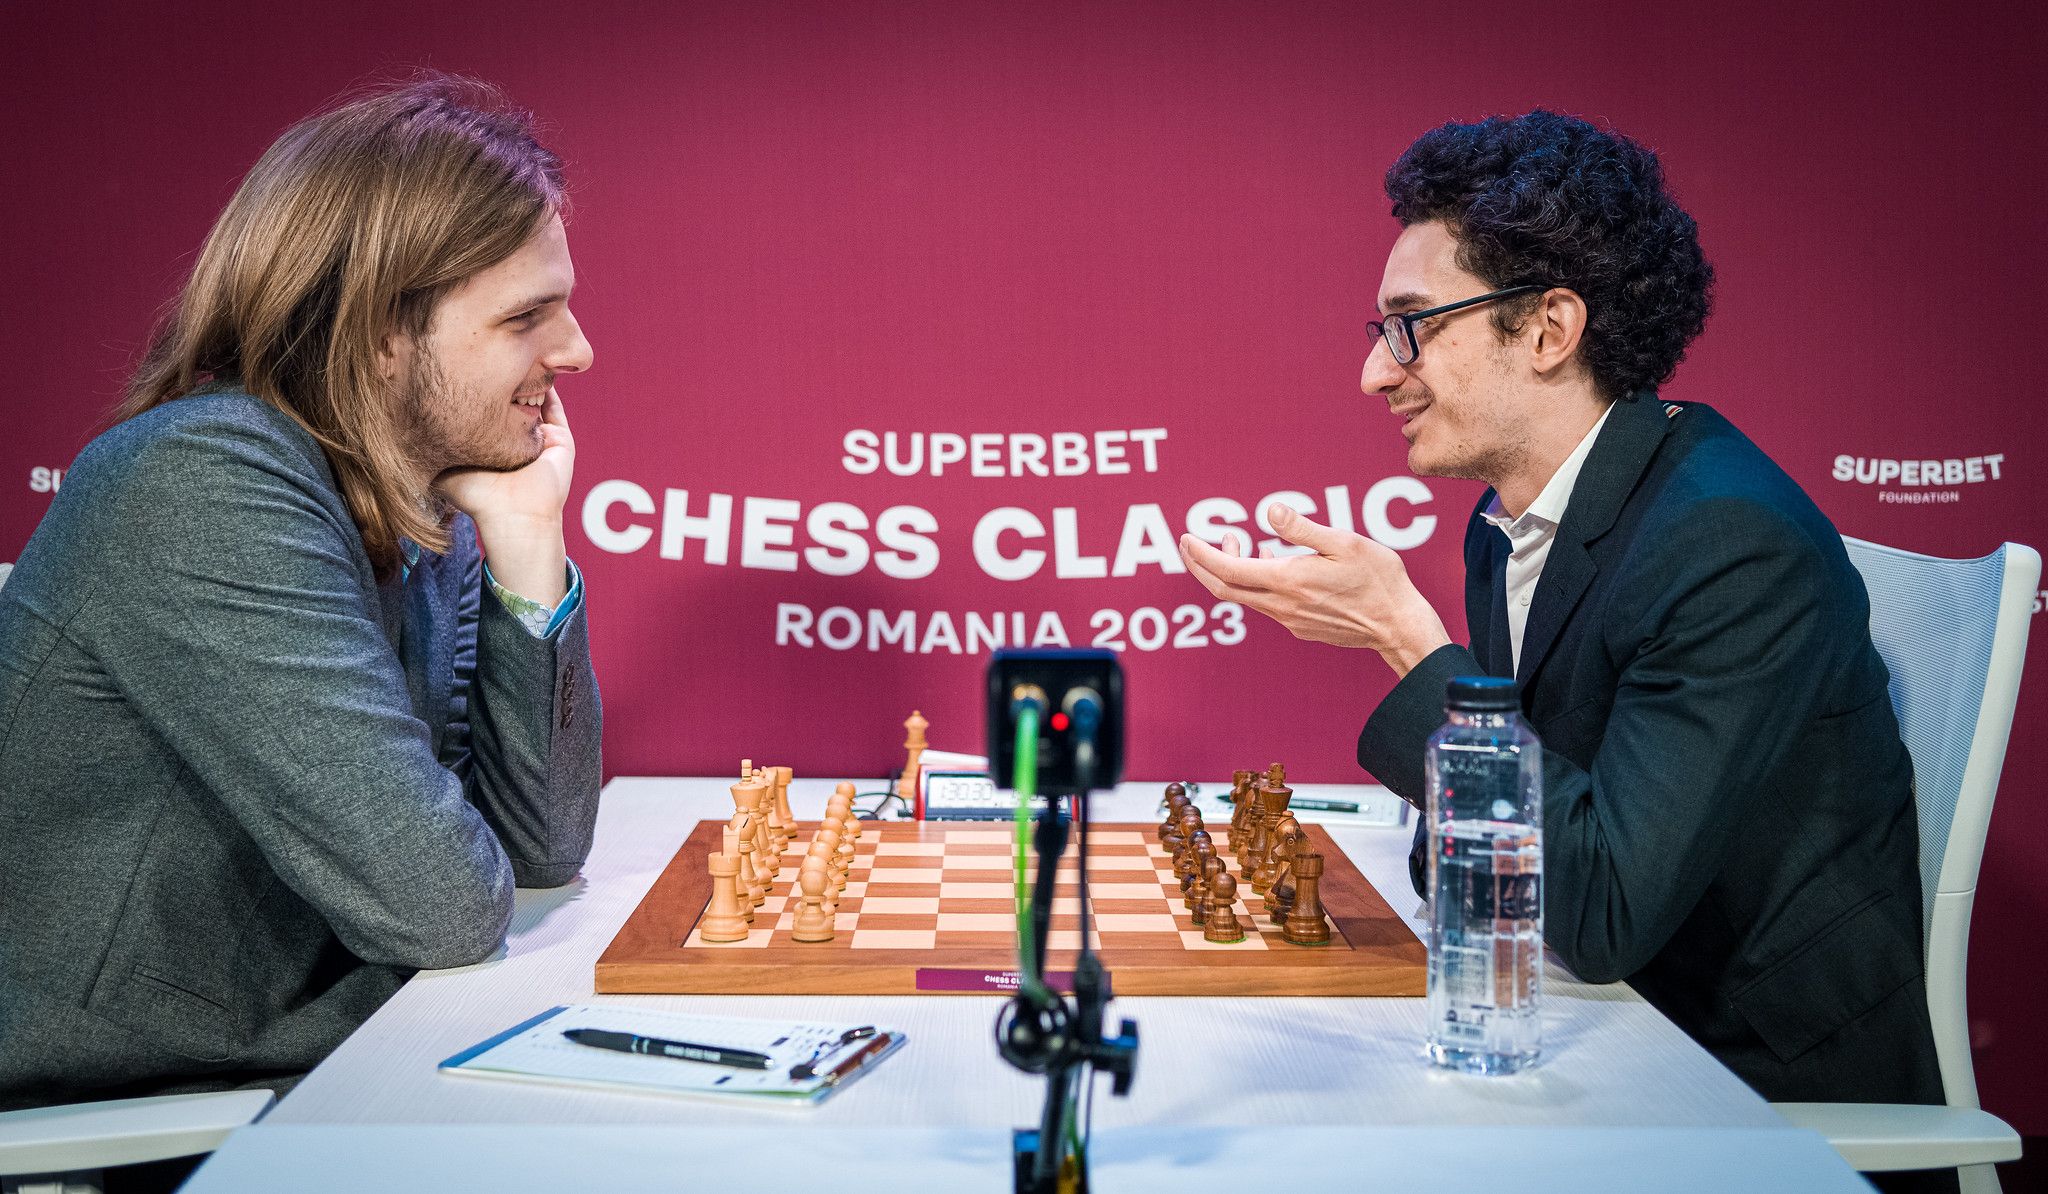 Superbet Chess Classic 6: So and Caruana miss wins